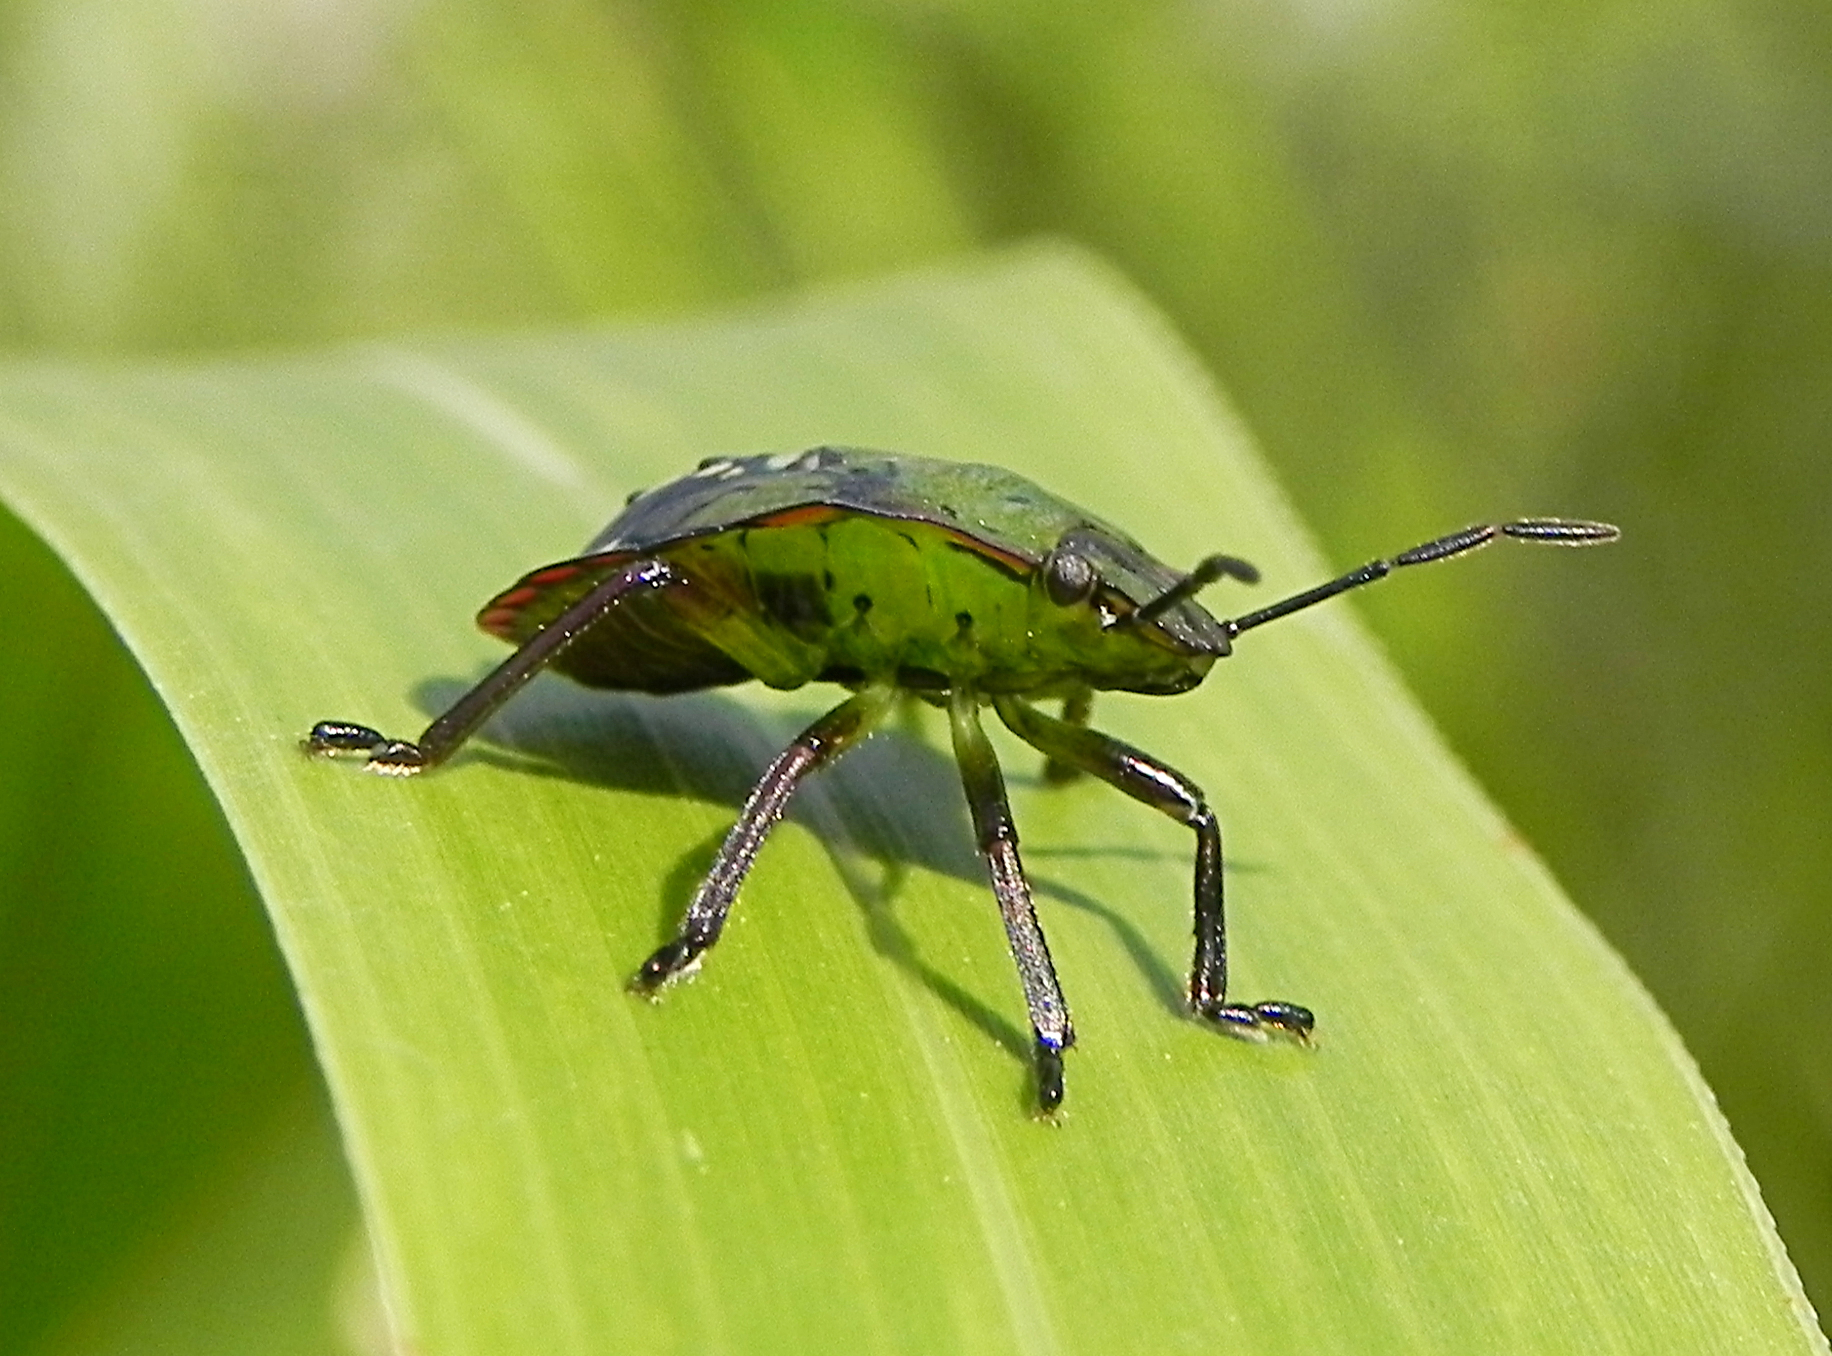 Fam. Pentatomidae, Italia, Brescia. 23 Aug 2014. Provided by Paolo to children for didactics, but not shot with them.